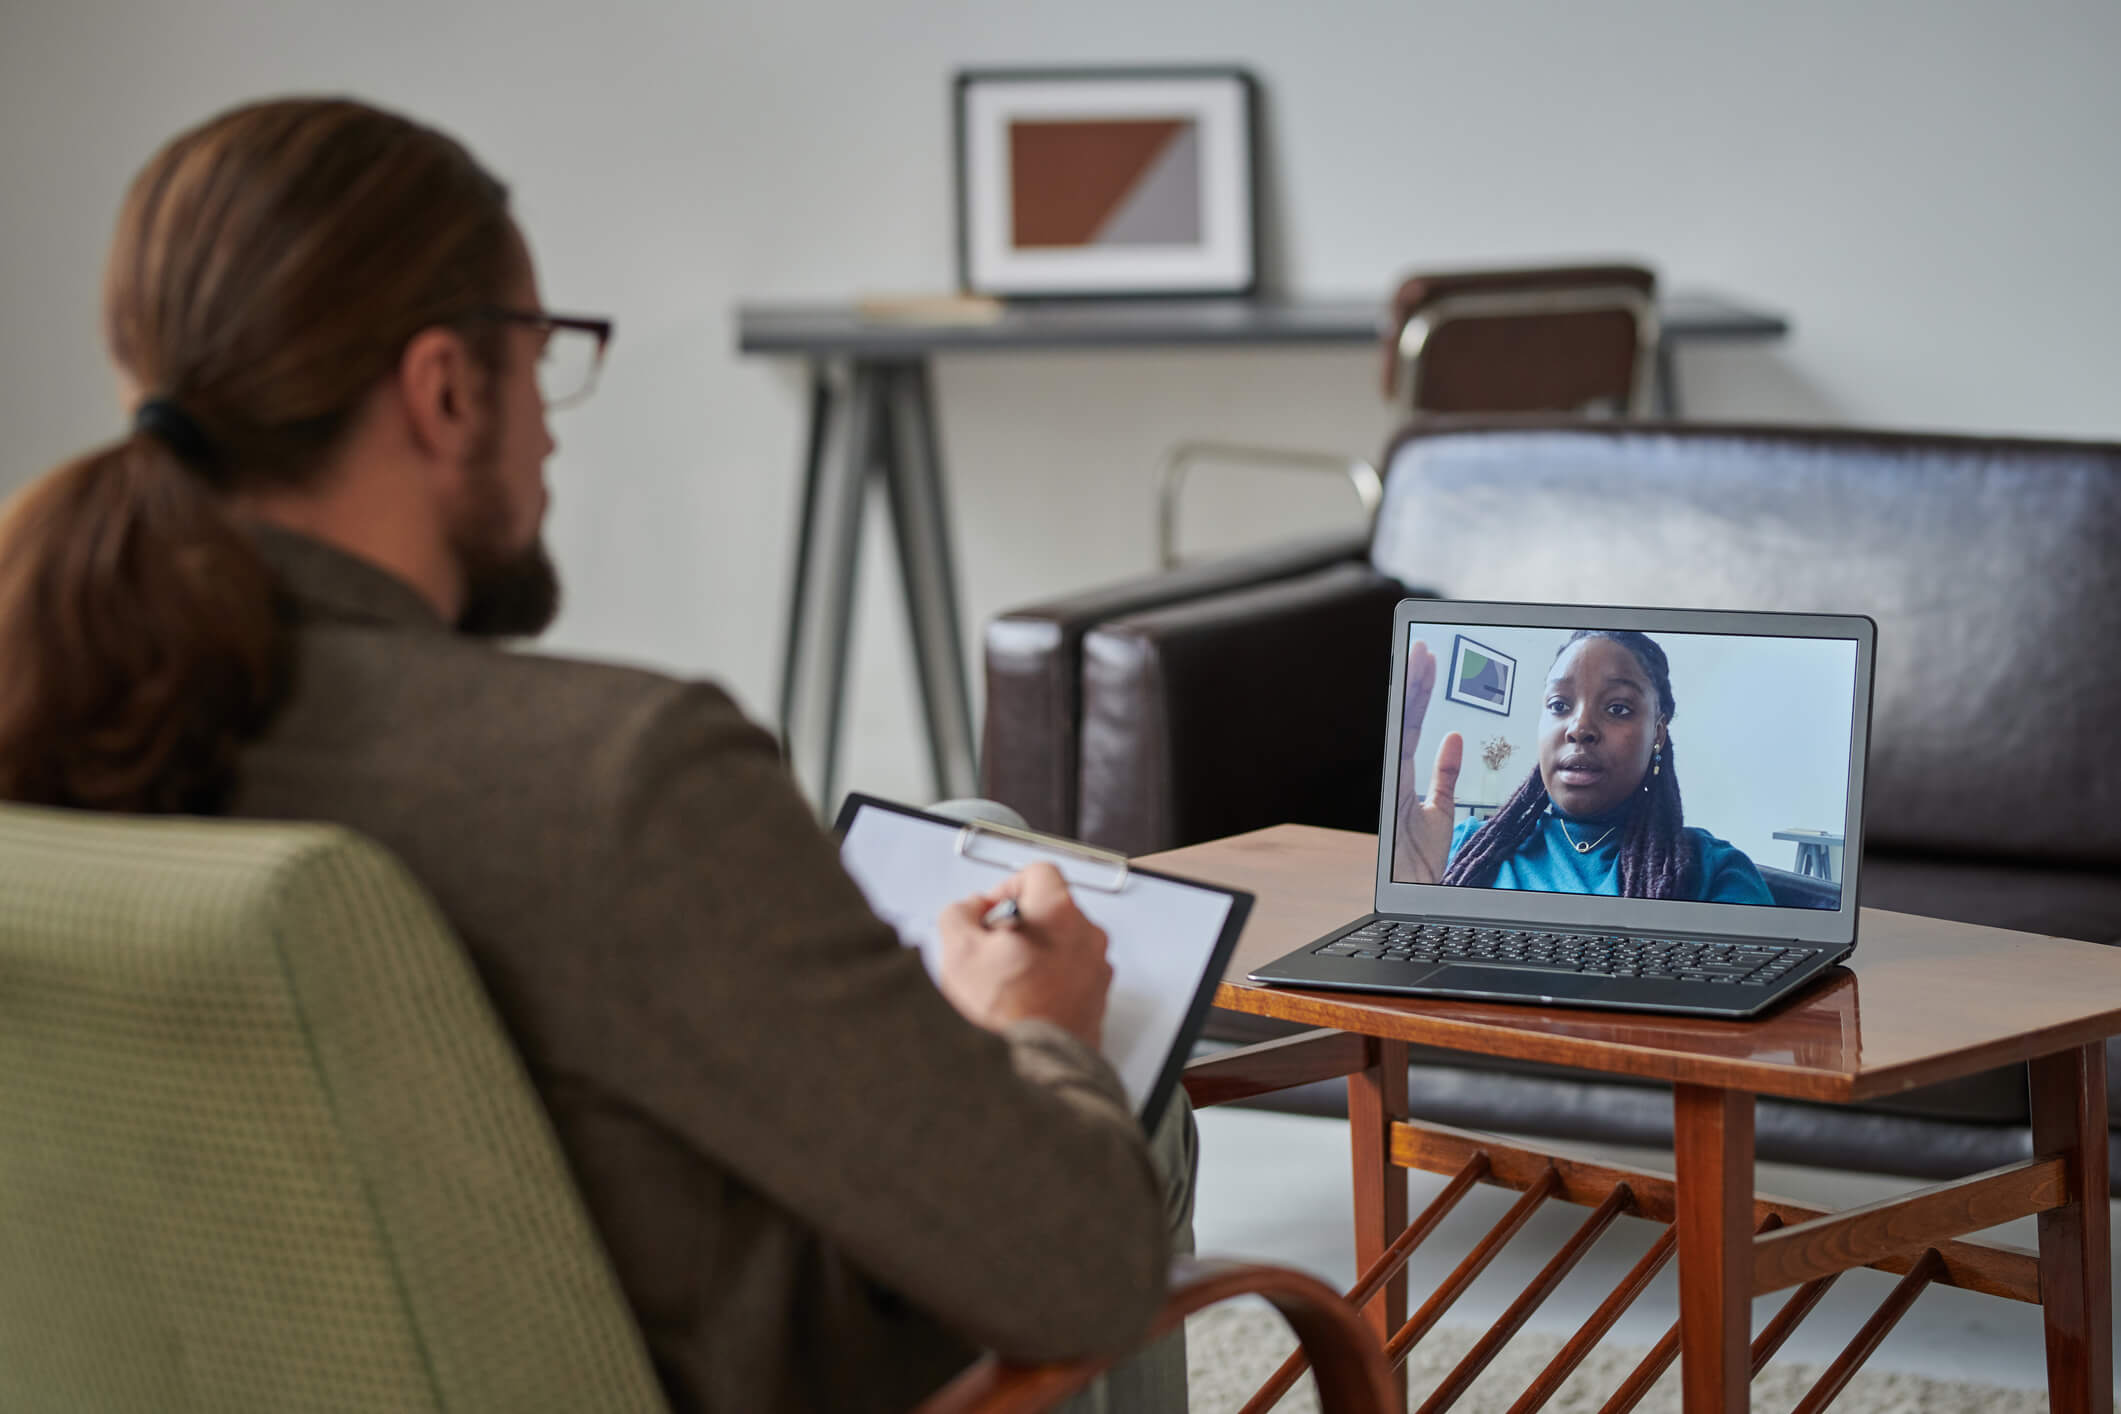 A counselor talking to a client on a video call.